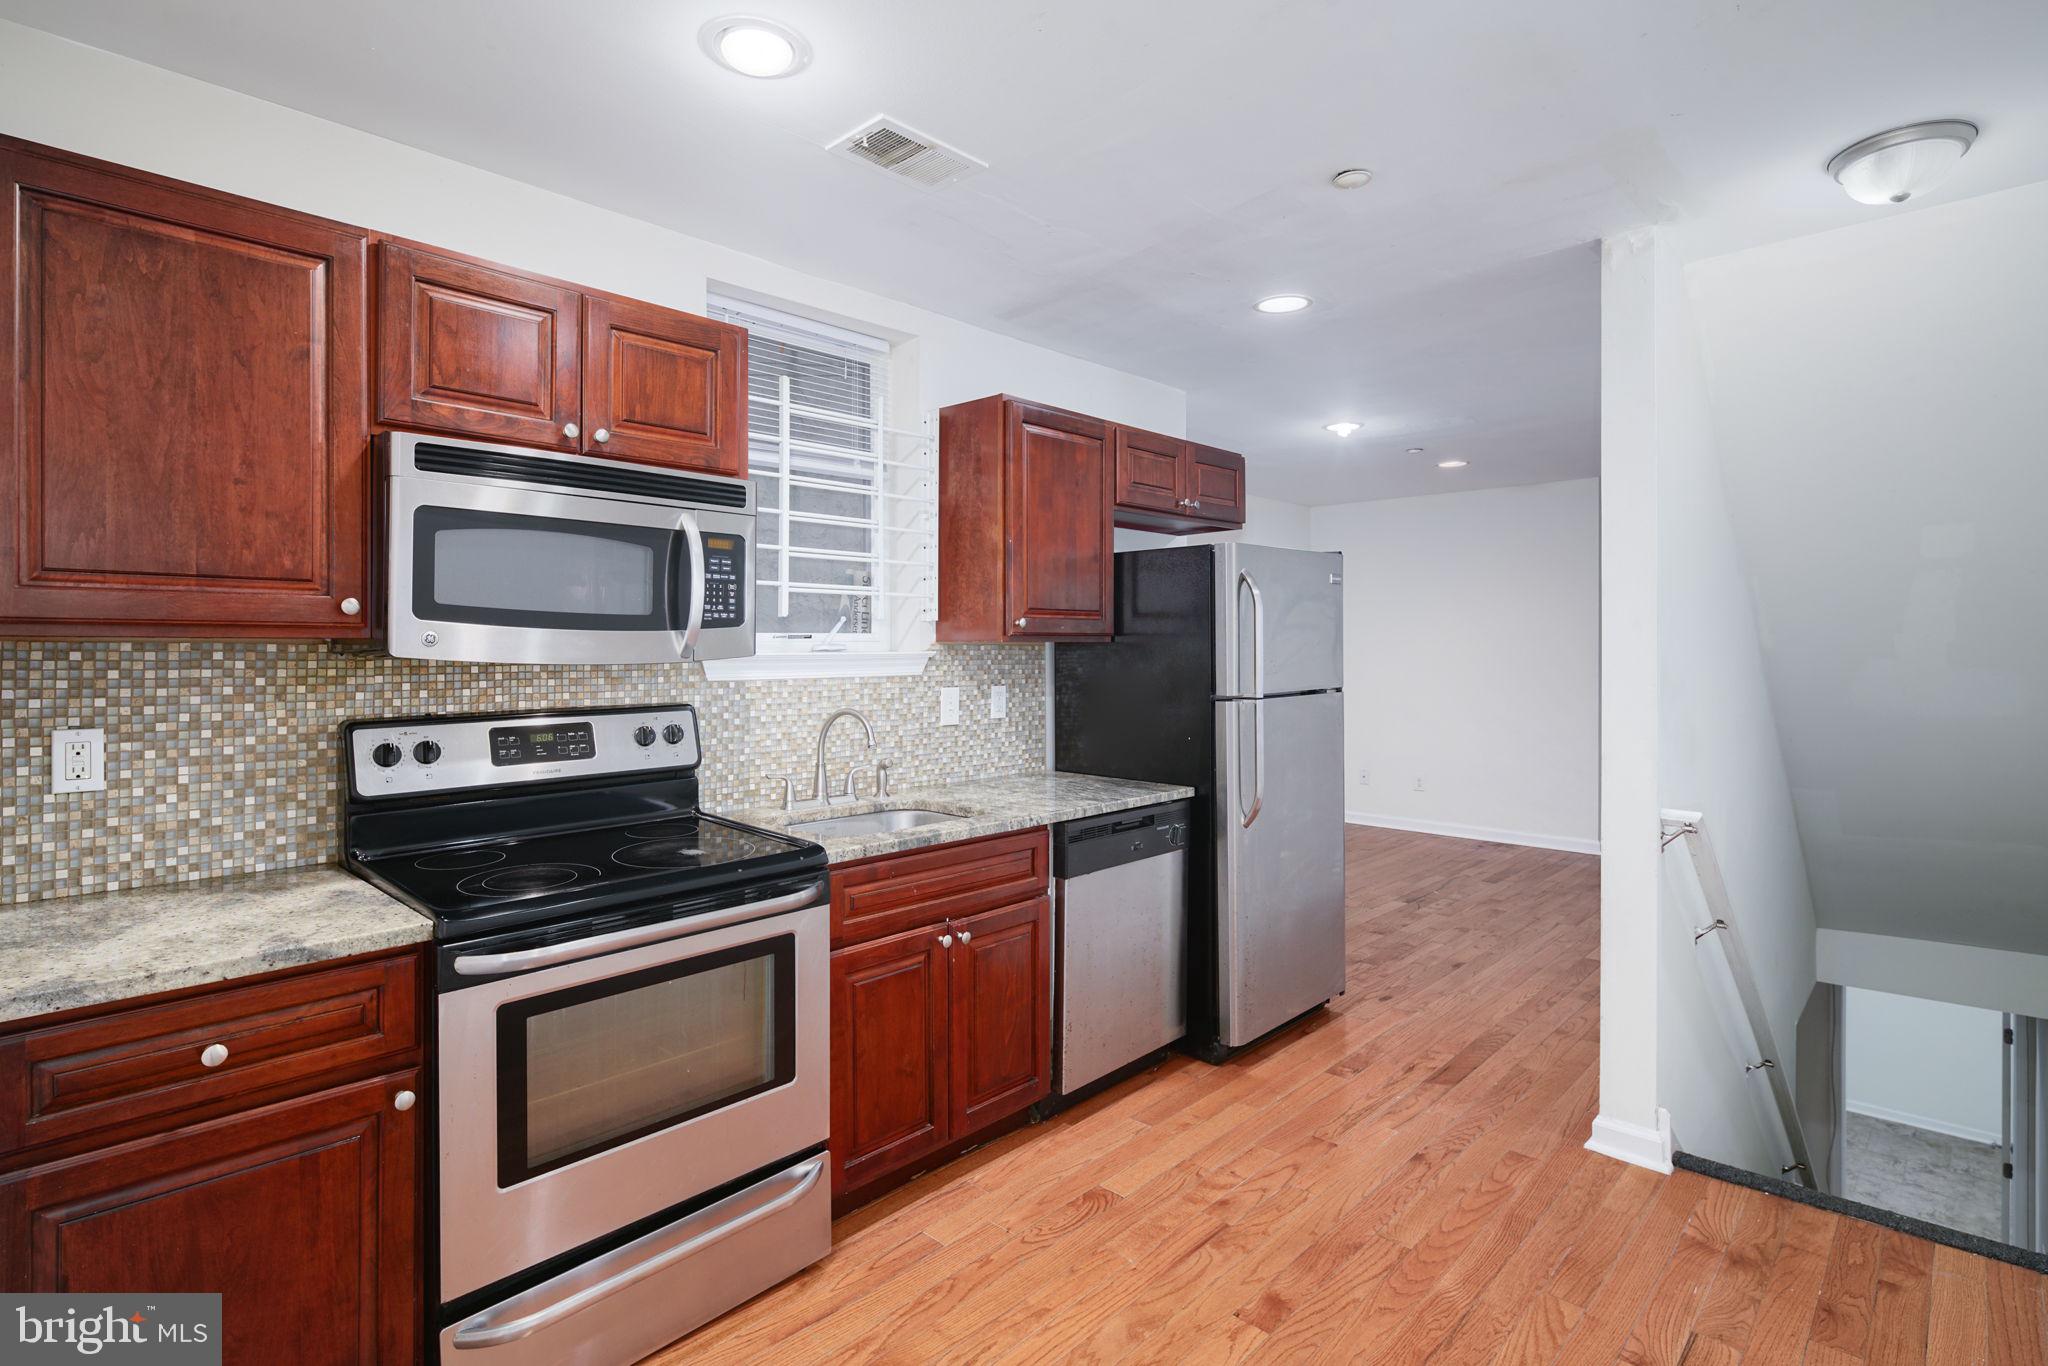 a kitchen with stainless steel appliances granite countertop wooden cabinets a stove a microwave and a refrigerator